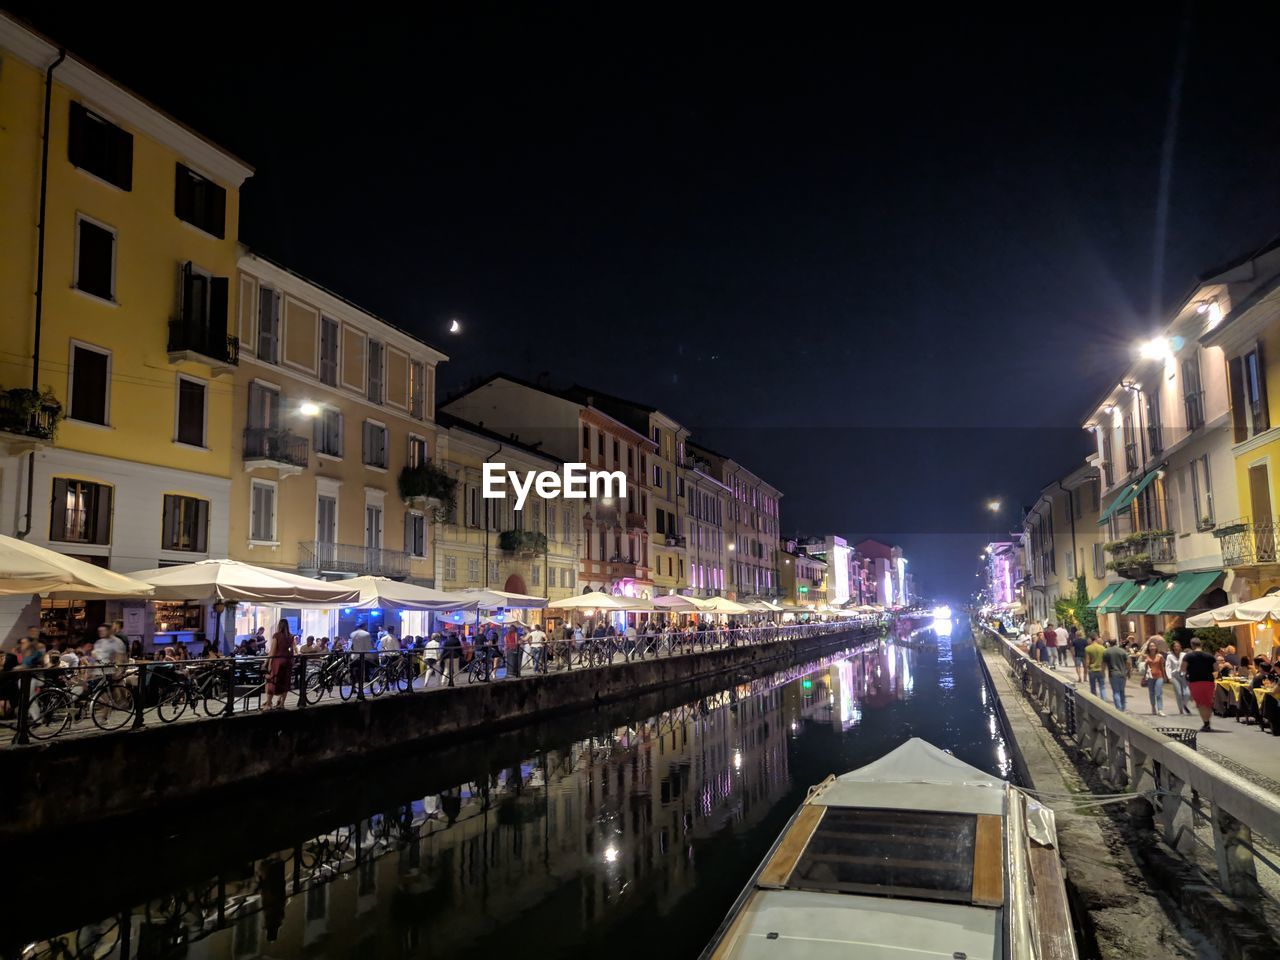 VIEW OF CANAL ALONG ILLUMINATED BUILDINGS AT NIGHT